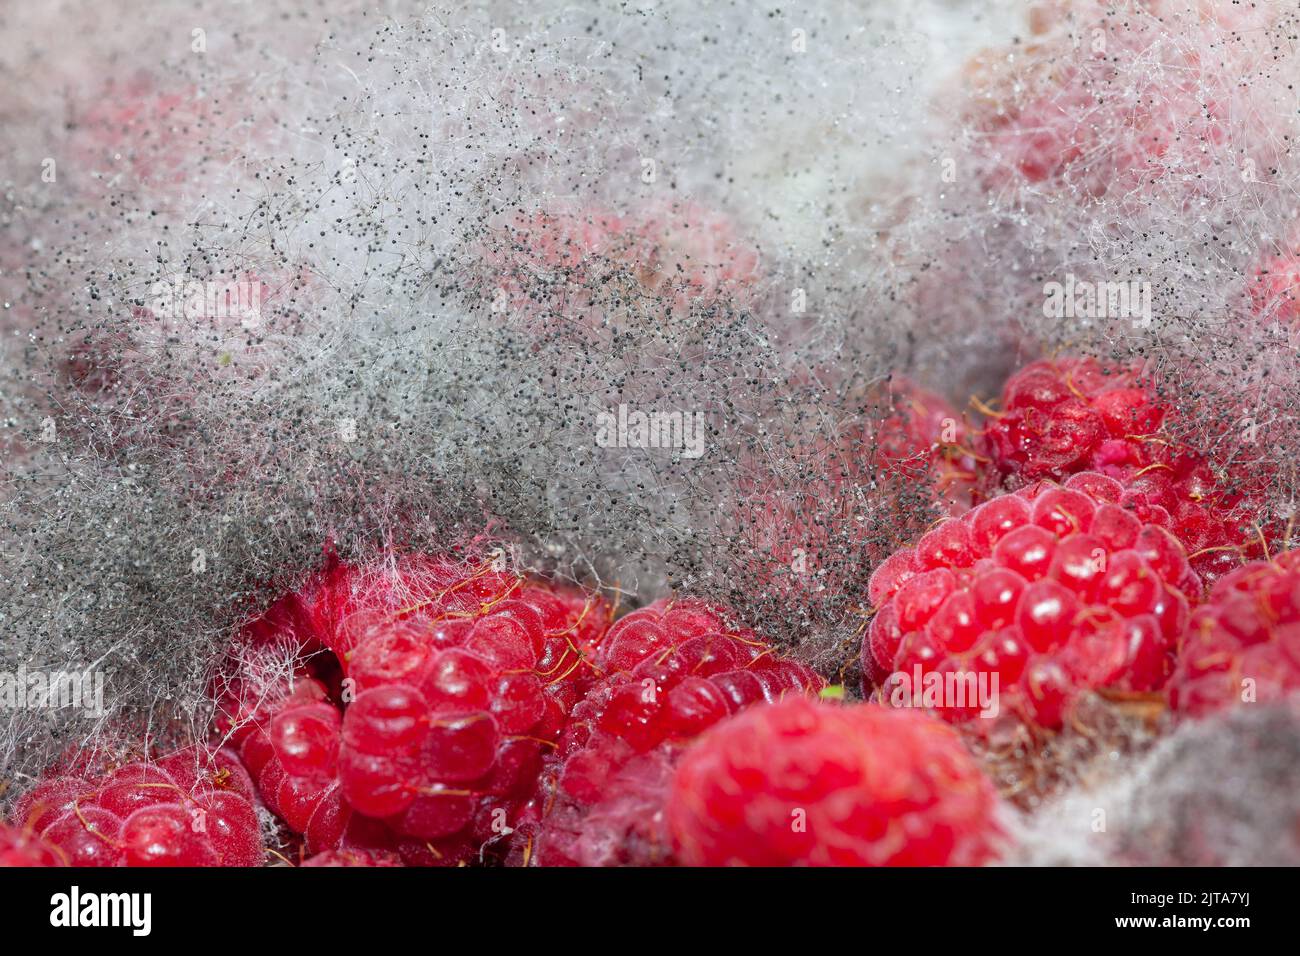 Red rotten raspberry with white grey mold . Spoiled crop of raspberry . Berries with fungus Stock Photo